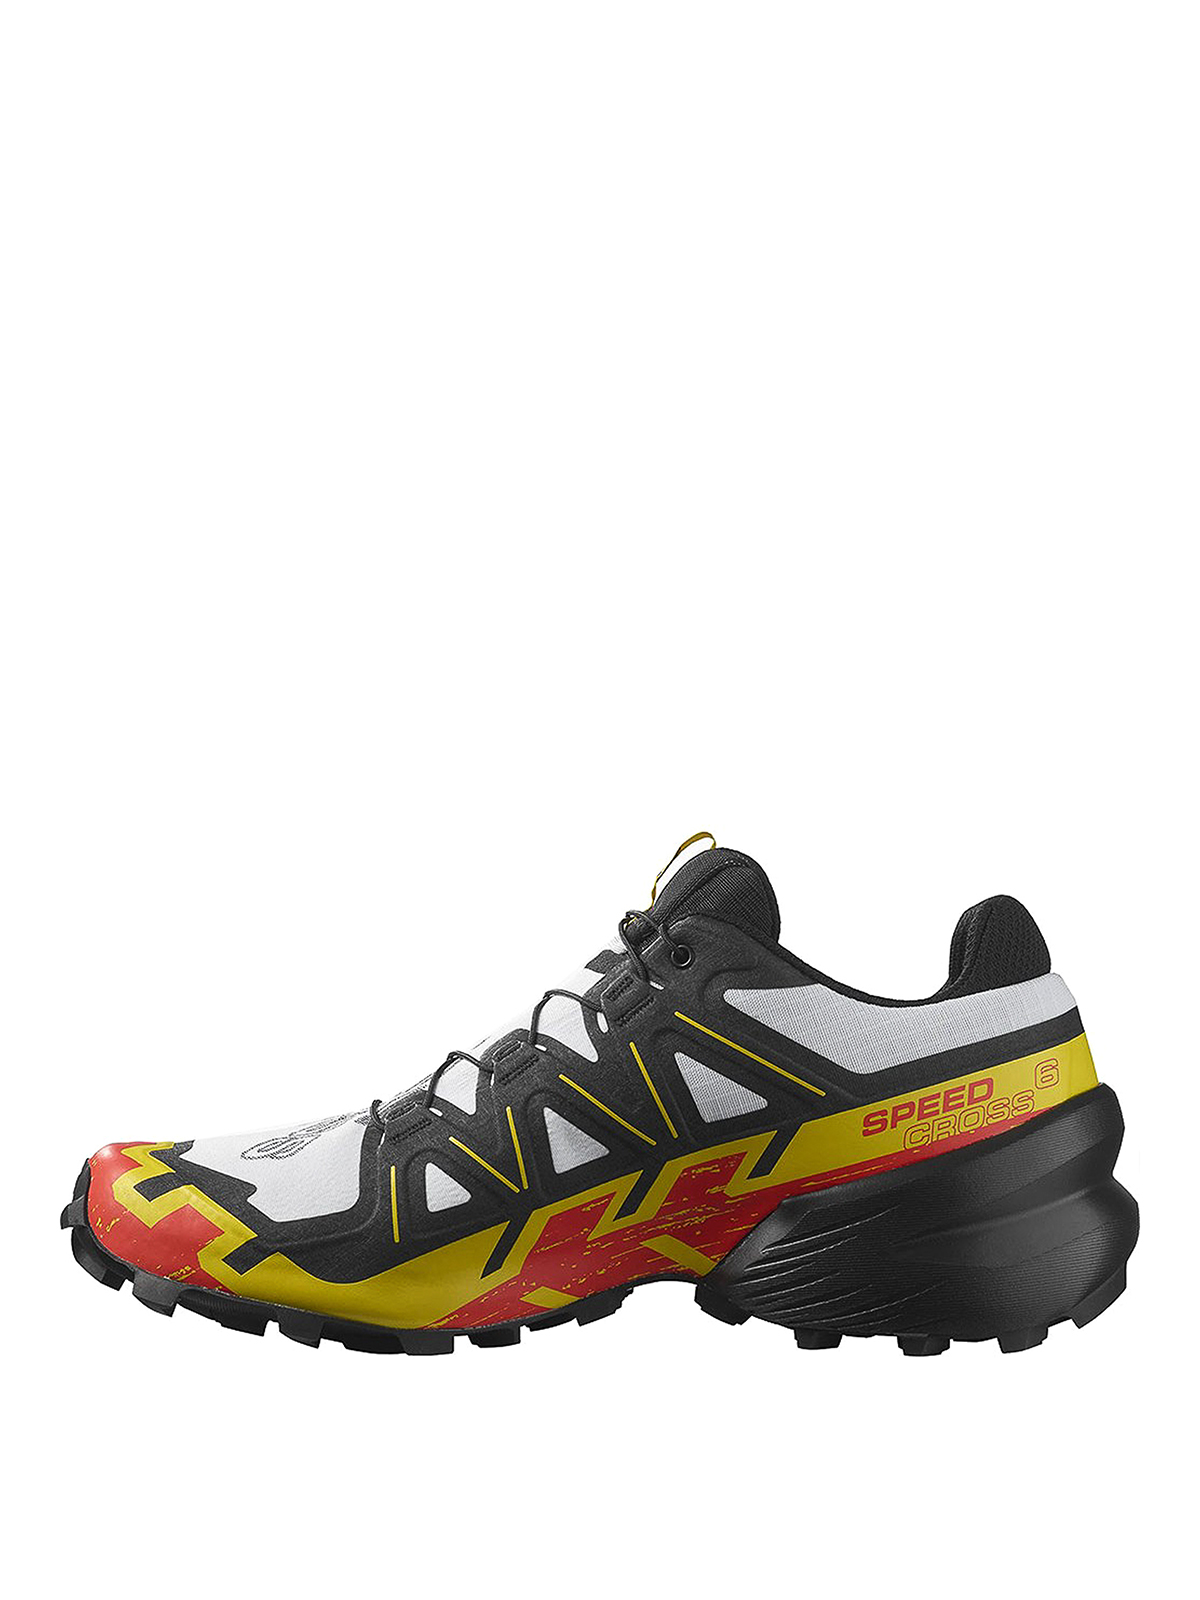 Trainers Salomon - sneakers 417378 | thebs.com